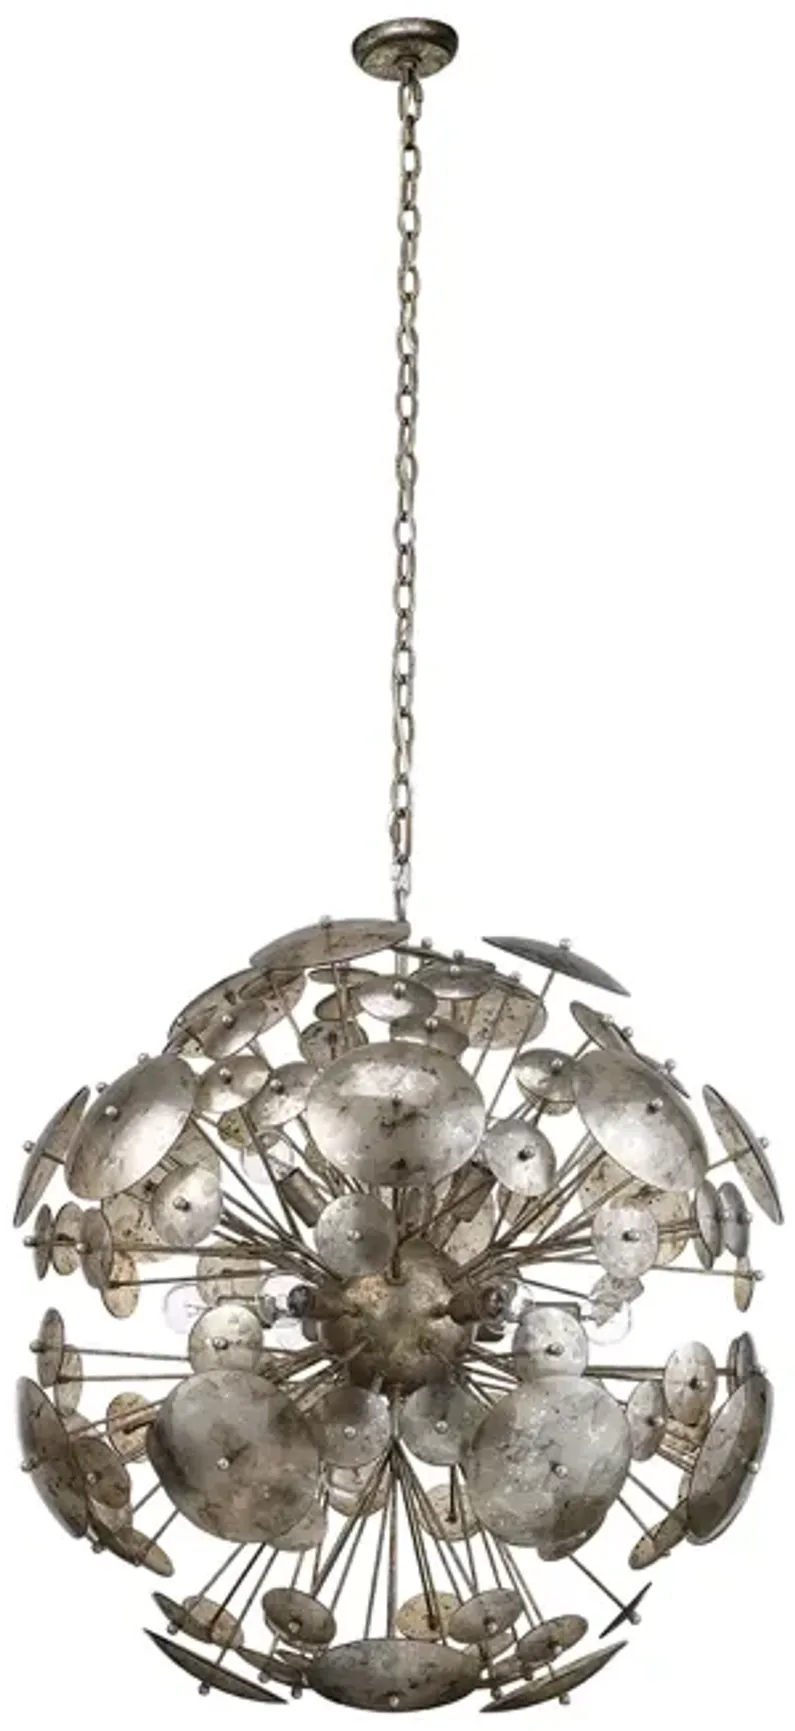 Jamie Young Company Constellation Round Chandelier